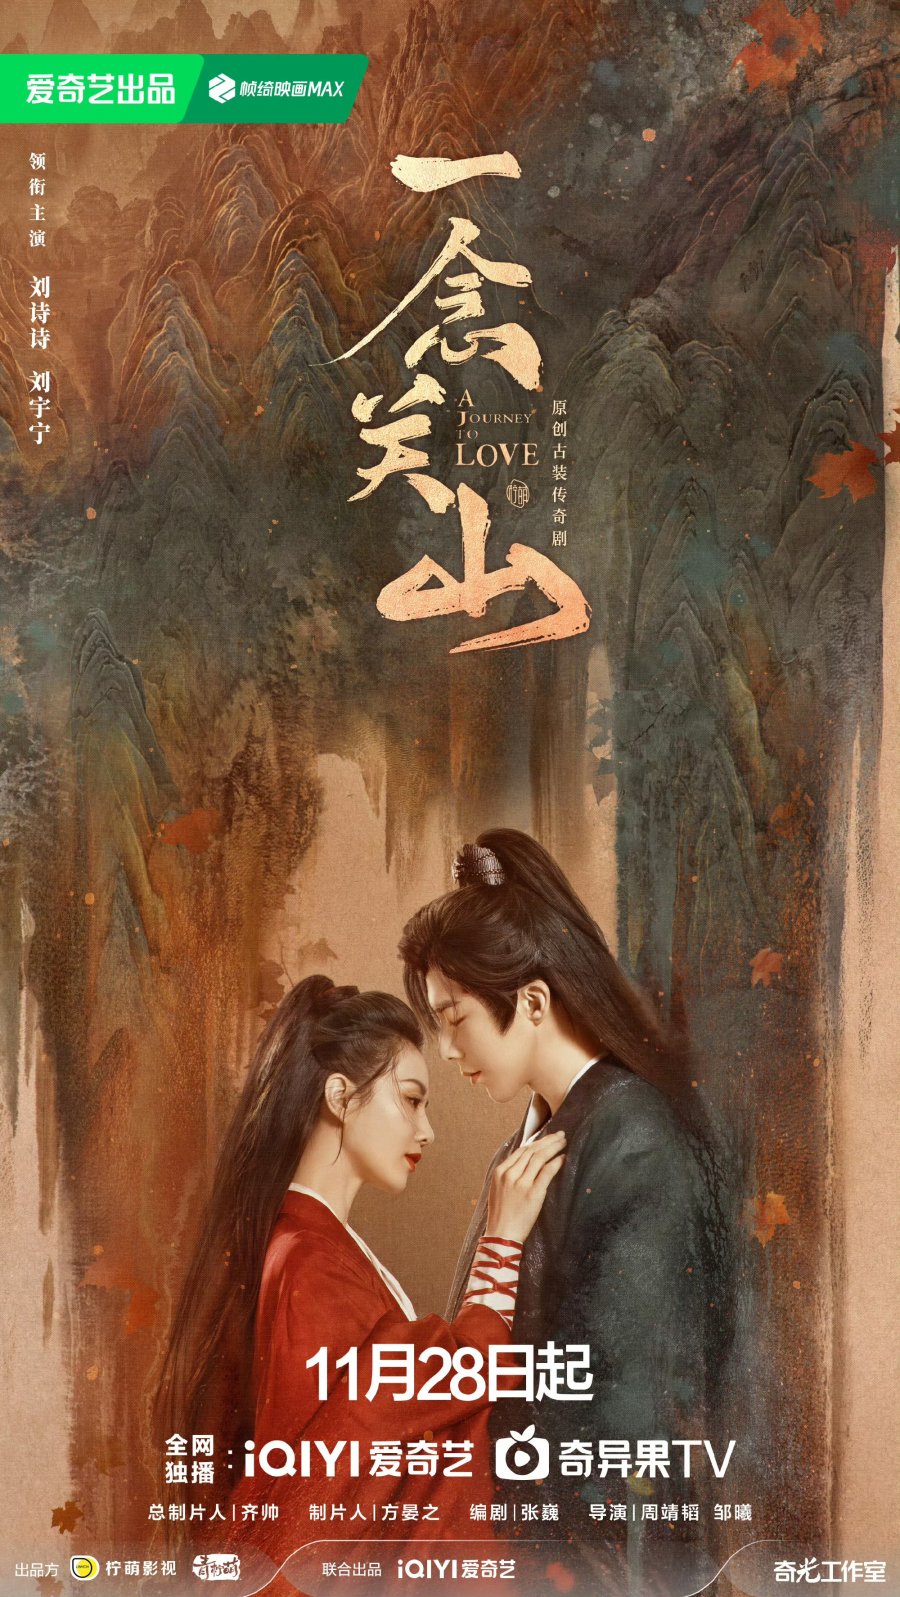 the journey to love chinese drama